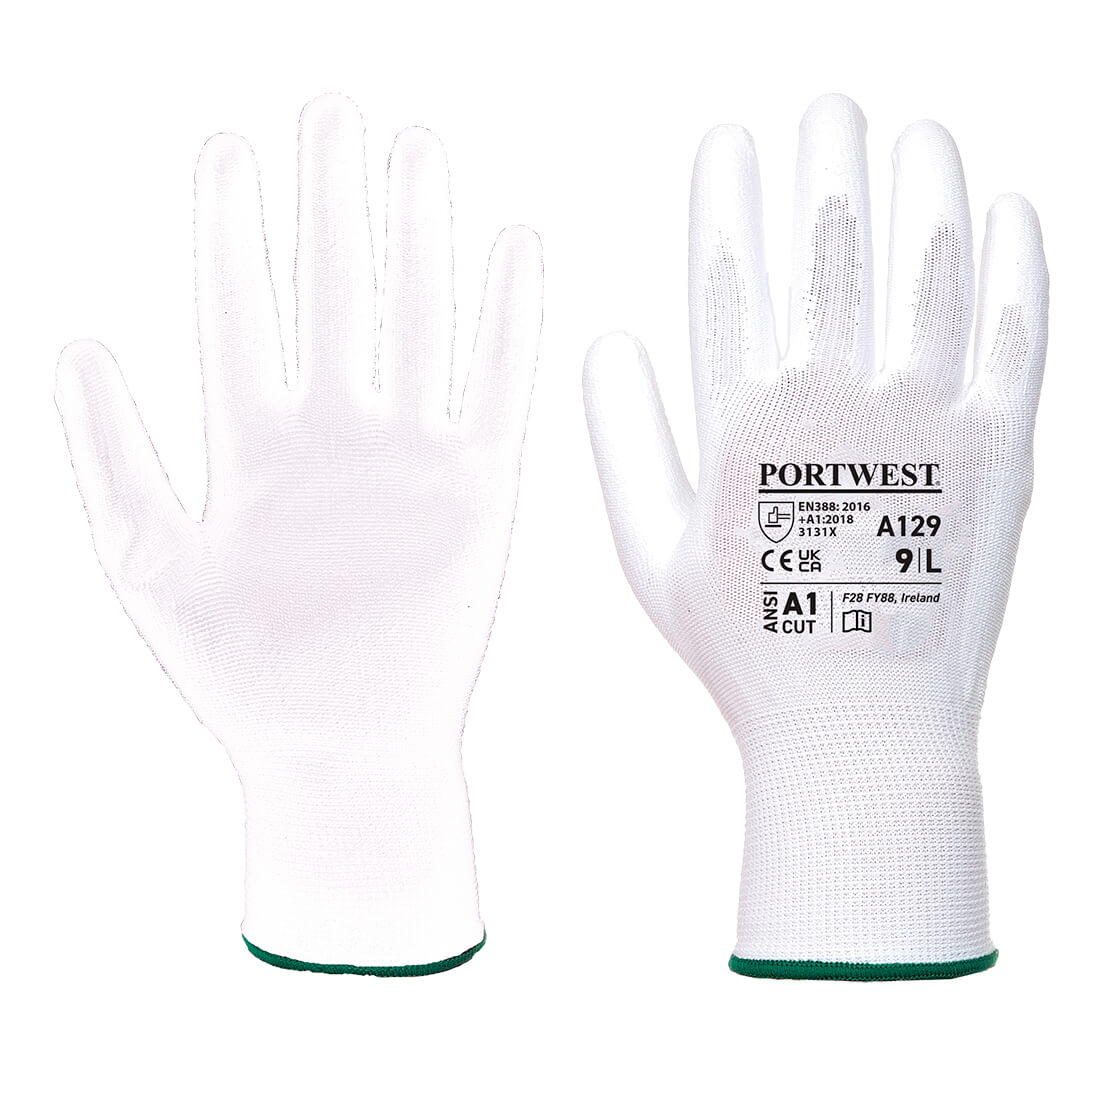 Portwest A129 PU Palm Glove - Carton (480 Pairs) for General Handling